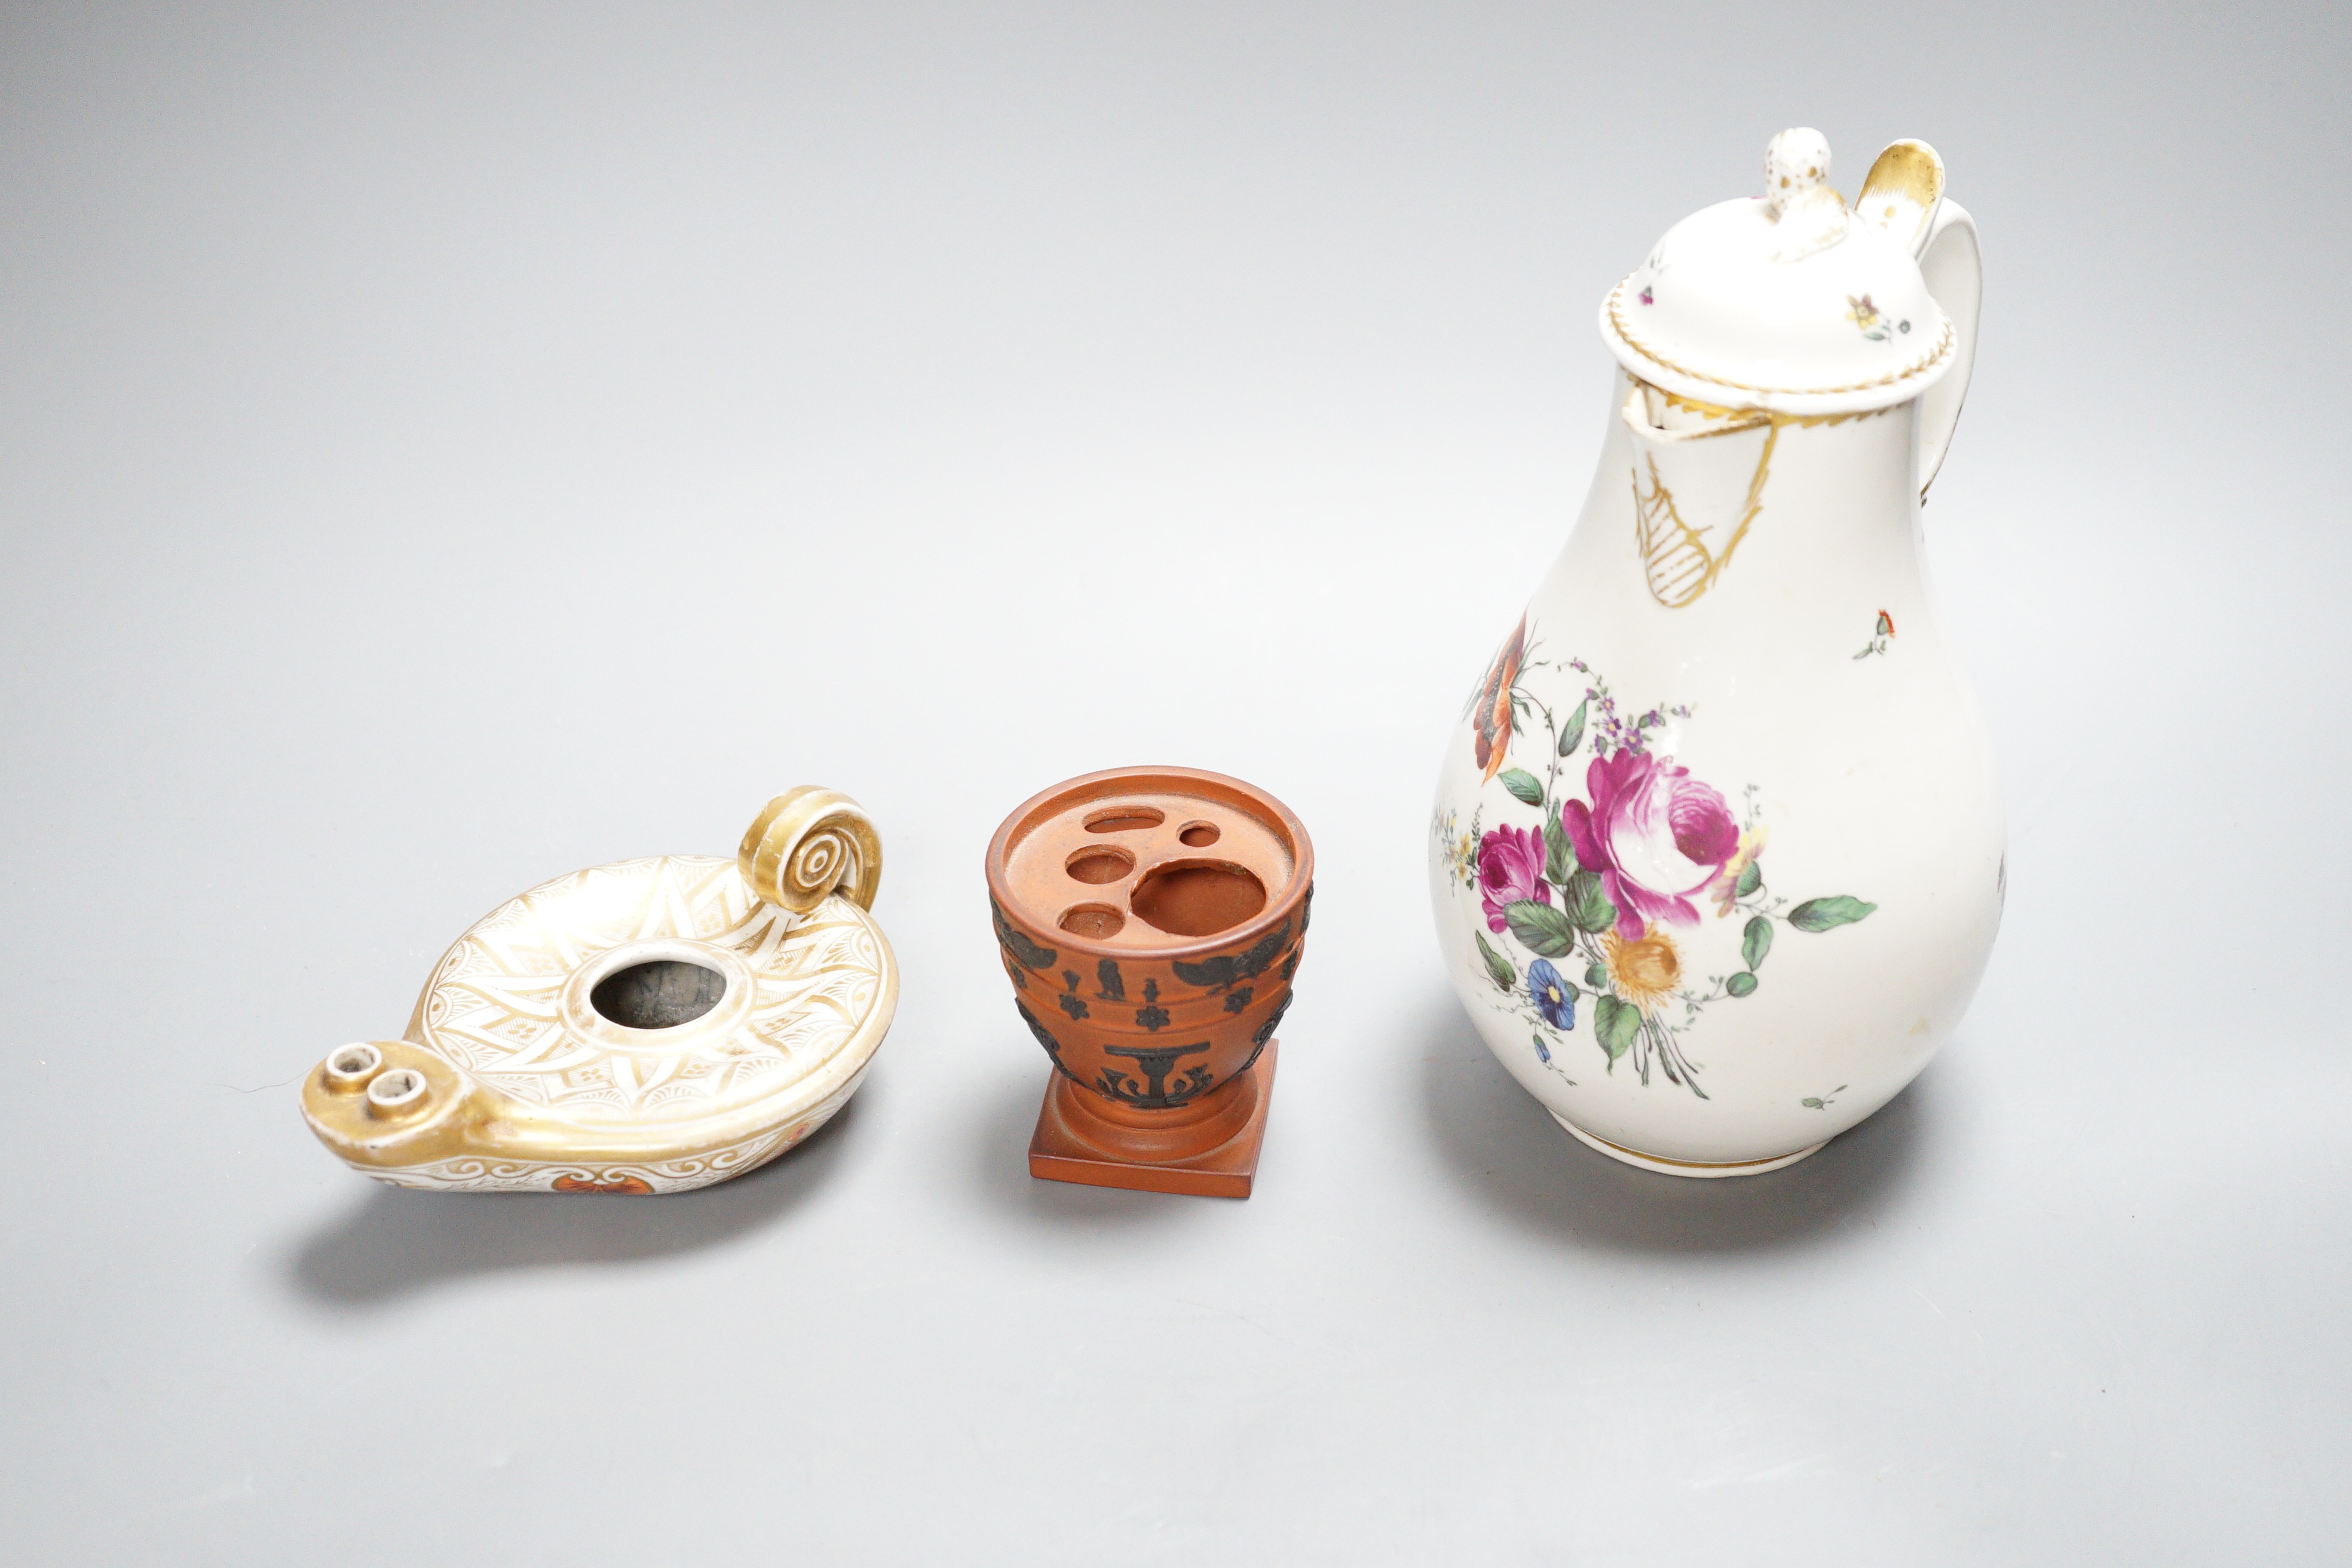 An 18th century English porcelain hot water jug, a Wedgwood two-colour terracotta pot and an early 19th century oil lamp, tallest 20cm